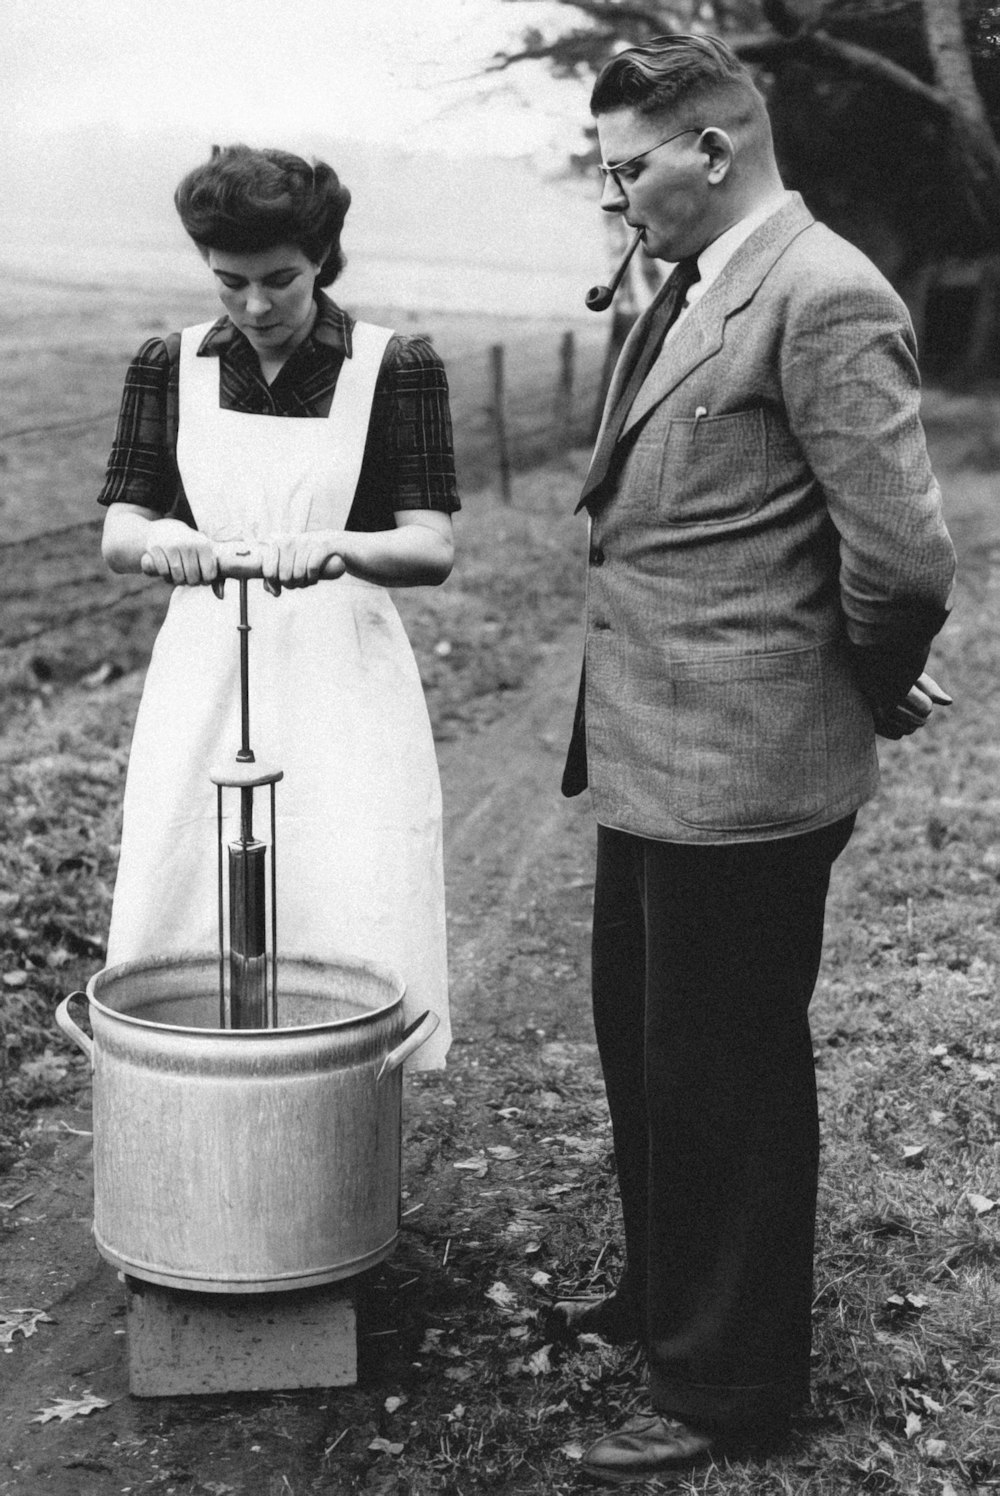 a man and a woman standing next to a barrel